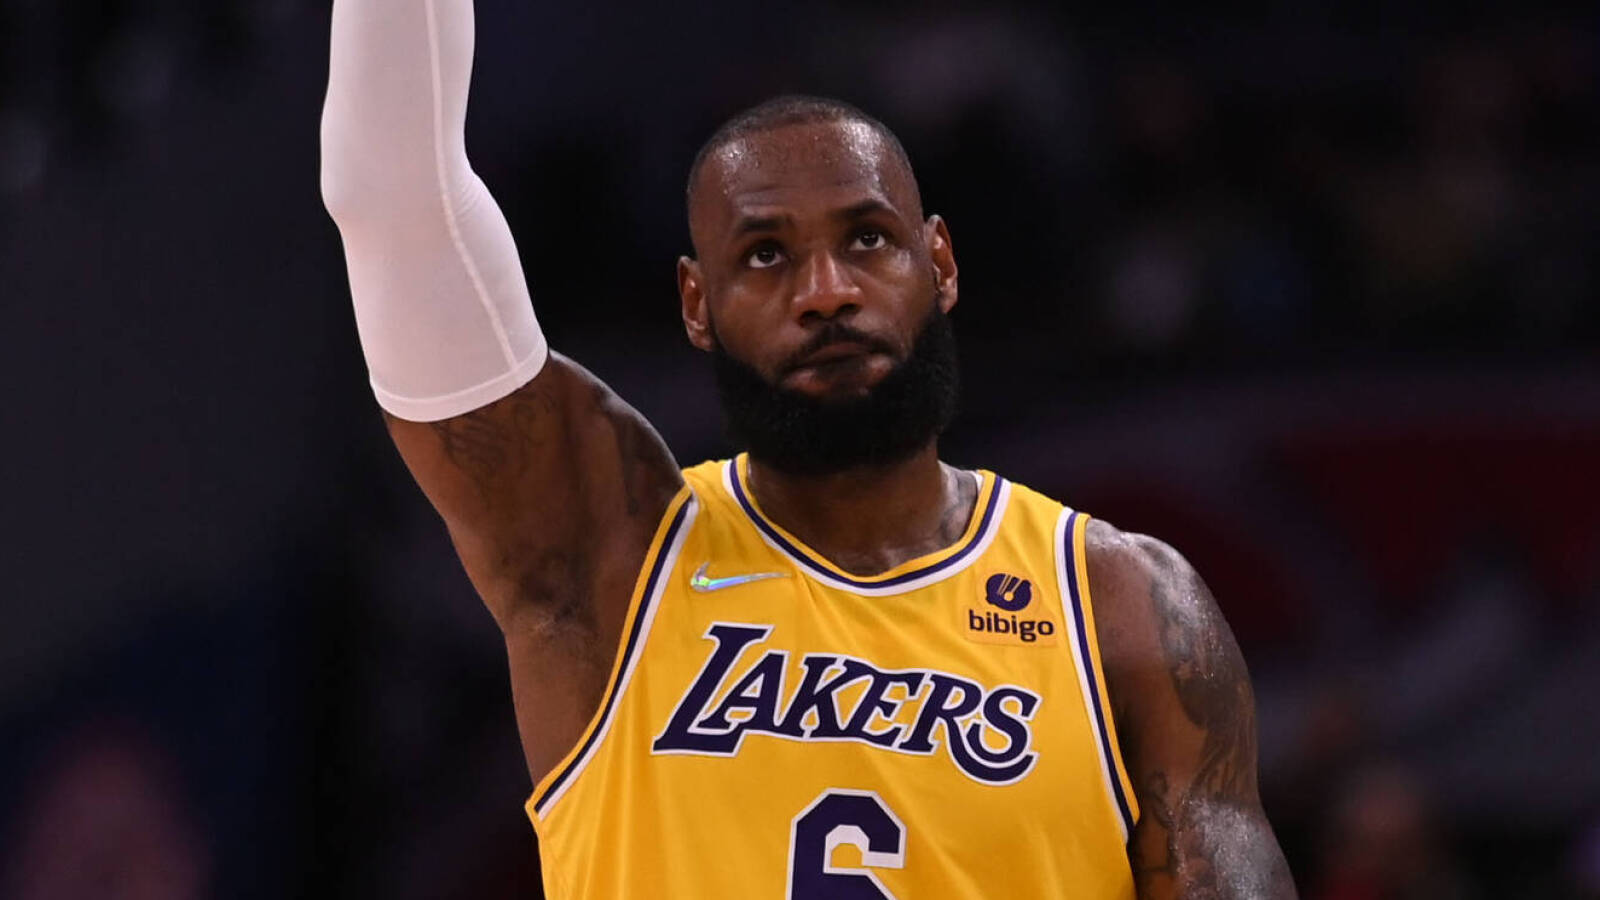 LeBron James passes Karl Malone for second most points in NBA history